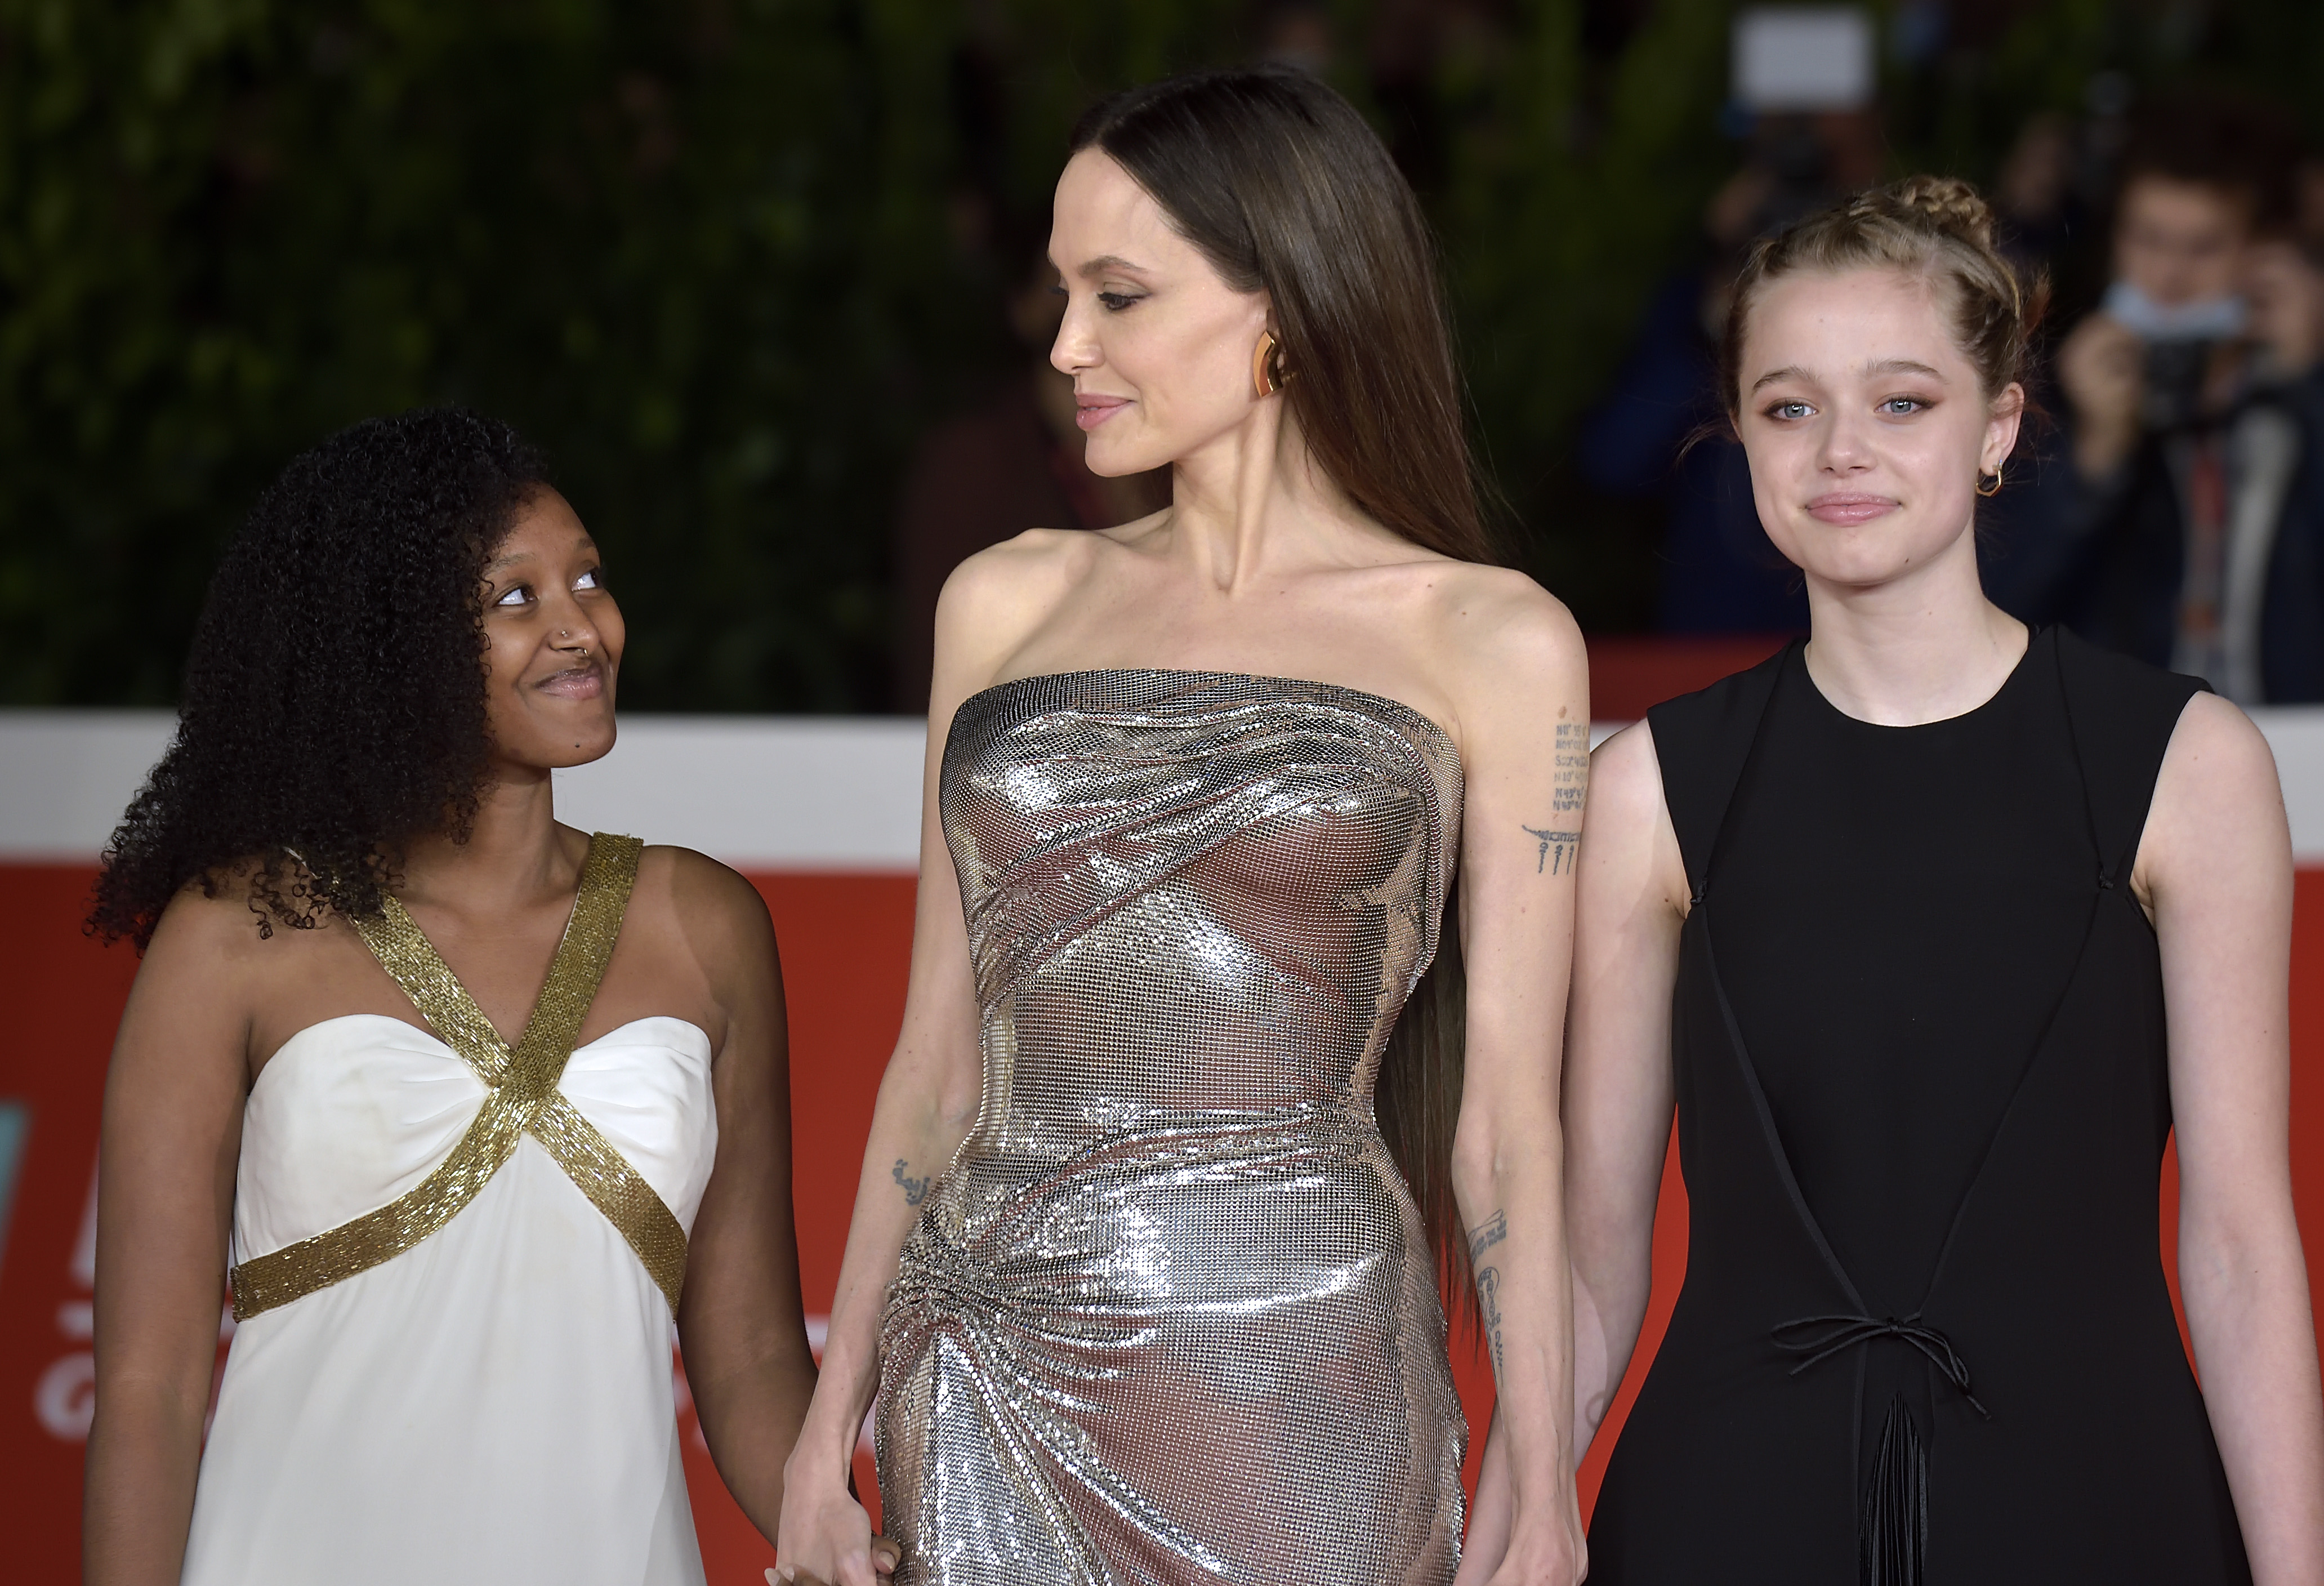 Zahara Marley Jolie-Pitt, Angelina Jolie, and Shiloh Jolie-Pitt at the Rome Film Fest for "Eternals" in Italy on October 24, 2021 | Source: Getty Images